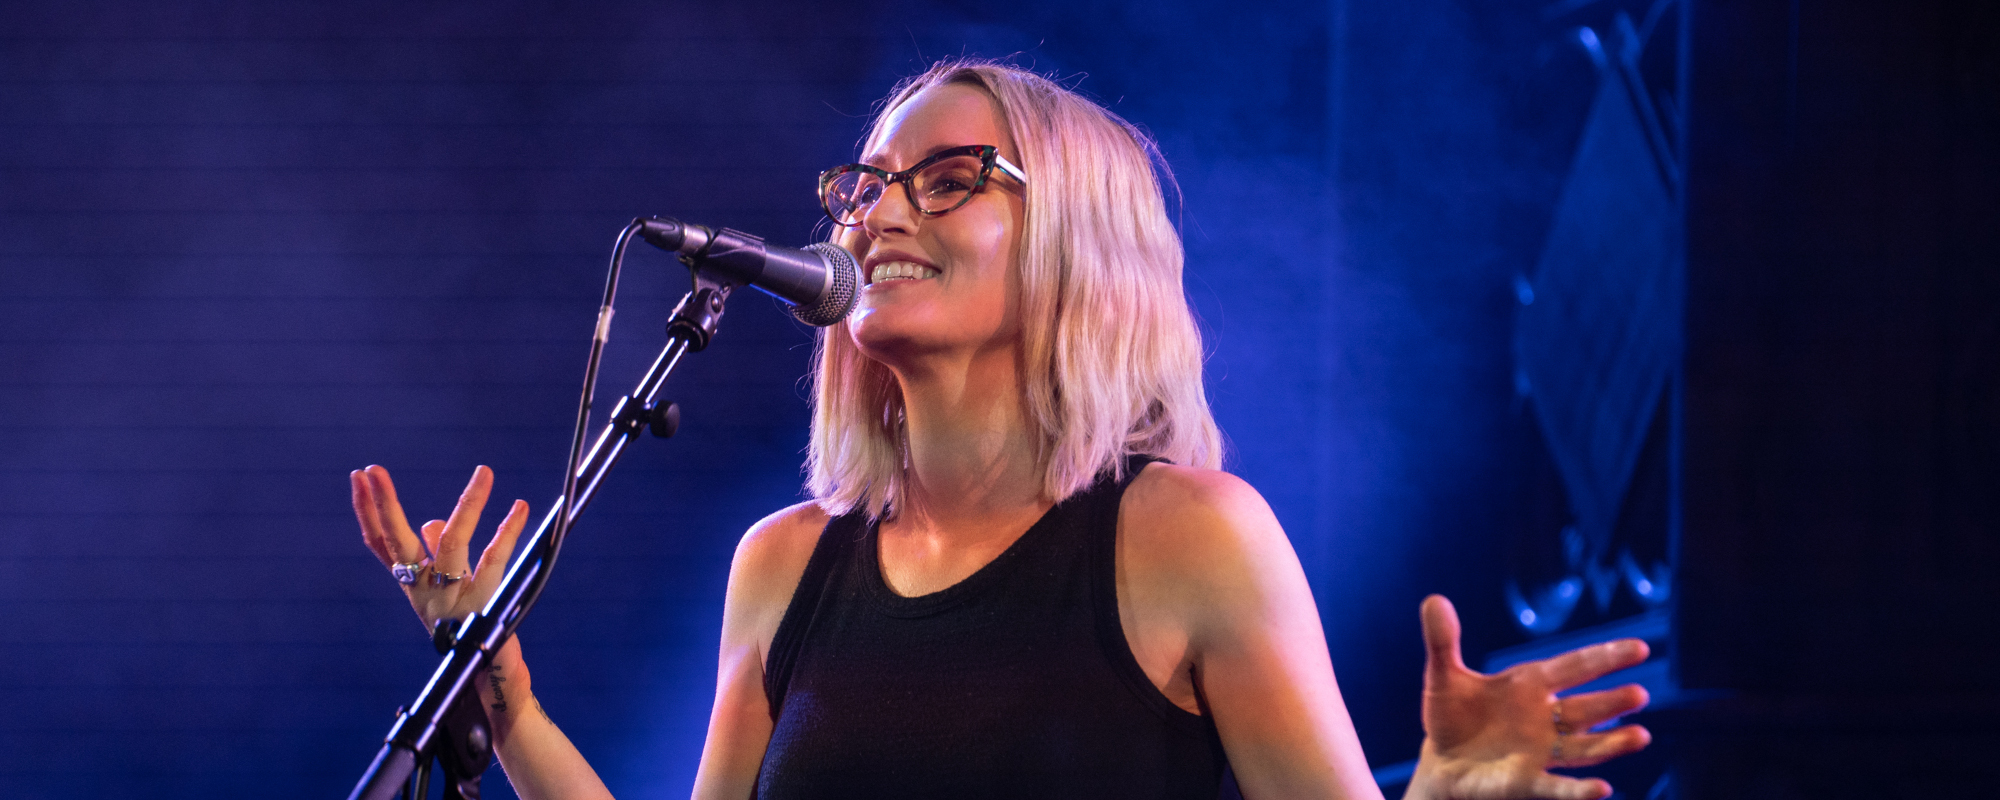 3 Songs You Didn’t Know Ingrid Michaelson Wrote for Other Artists